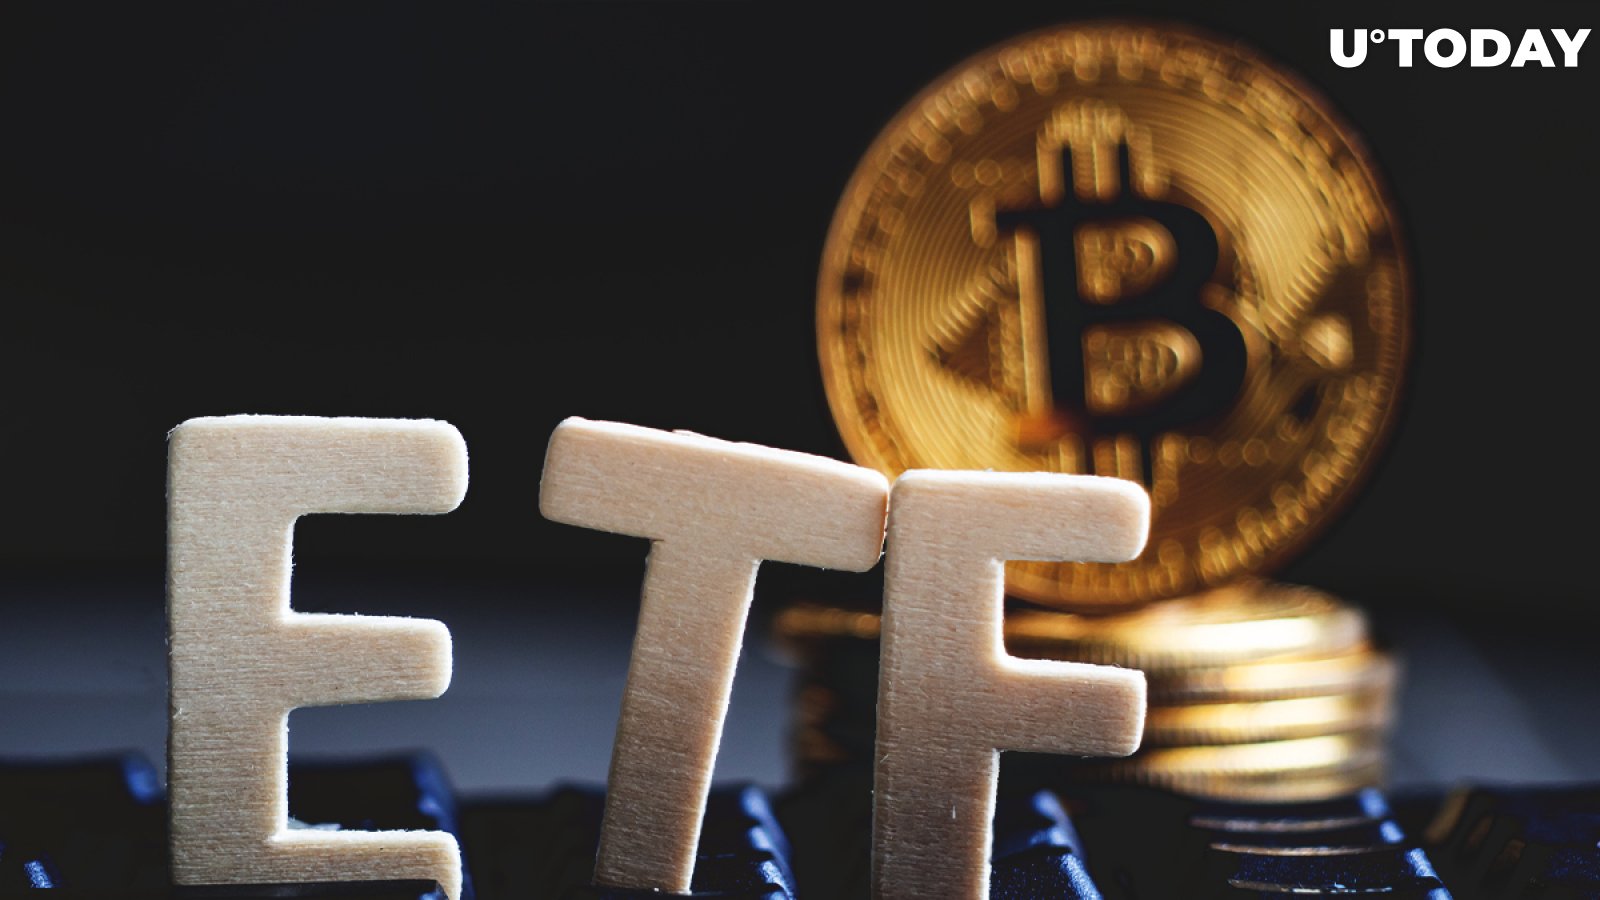 World's First Bitcoin ETF Just Launched